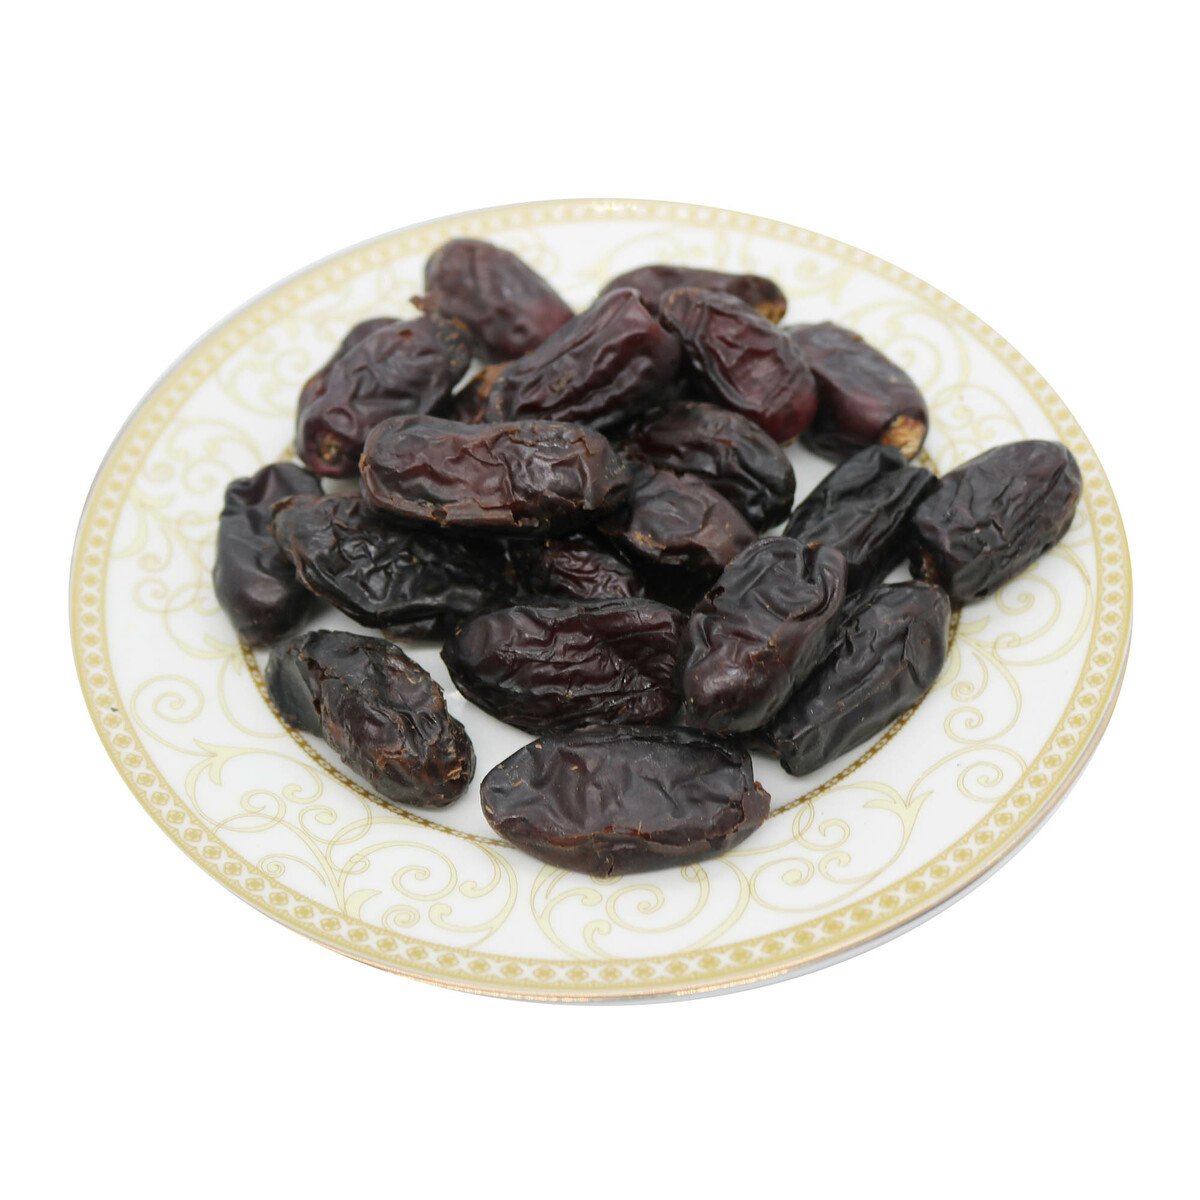 Dates Safawi 250g Approx Weight